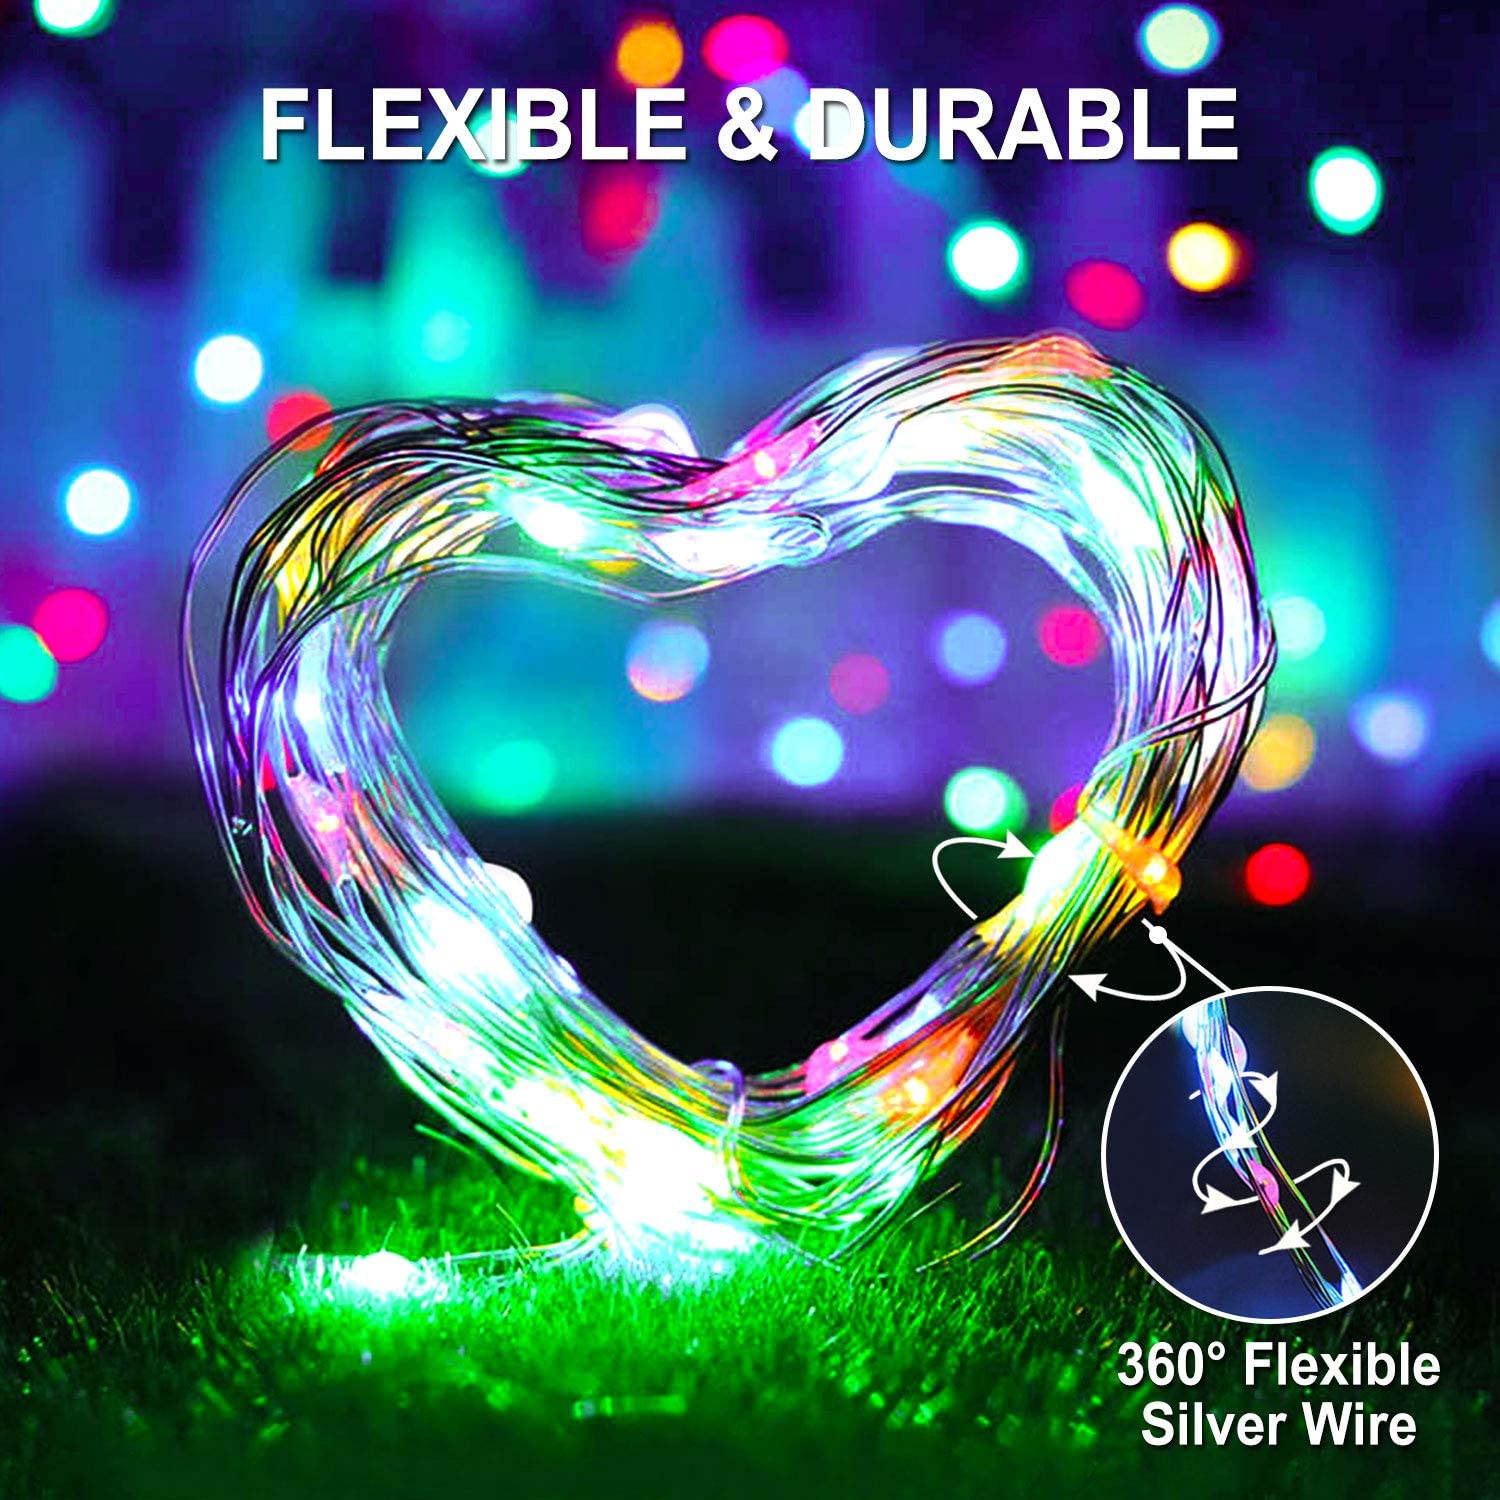 LED Solar String Lights Rope Light Strip Fairy Lights Outdoor Waterproof 8 Modes Garden Xmas Party Lam Decorative Lighting for Patio Garden Yard Party Wedding - image 3 of 9